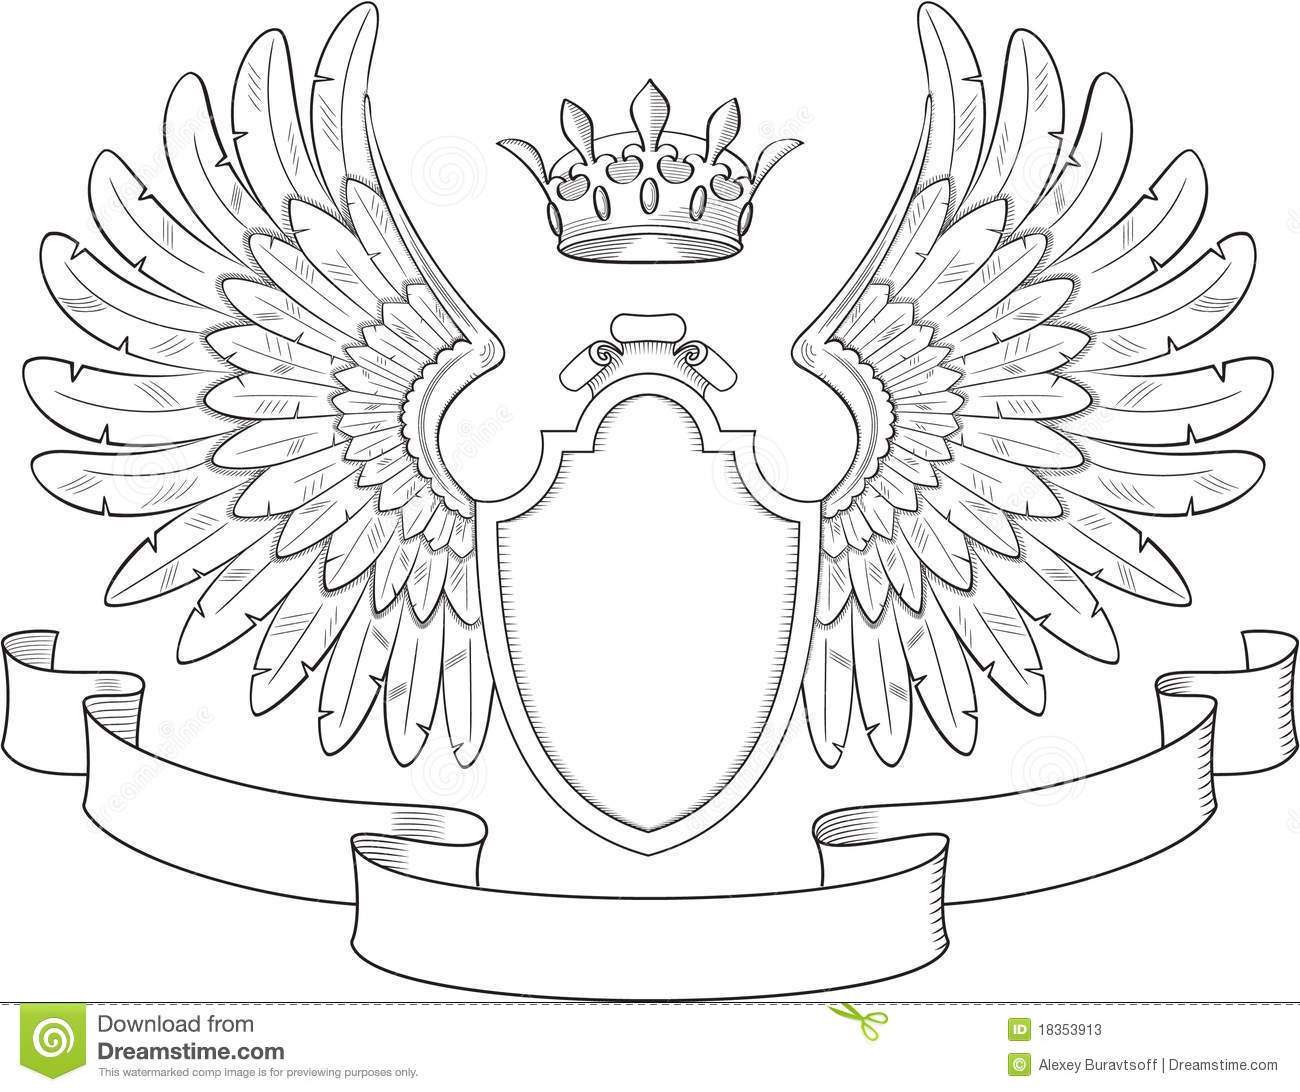 Family Crest Template Png Blank Coat Of Arms Template